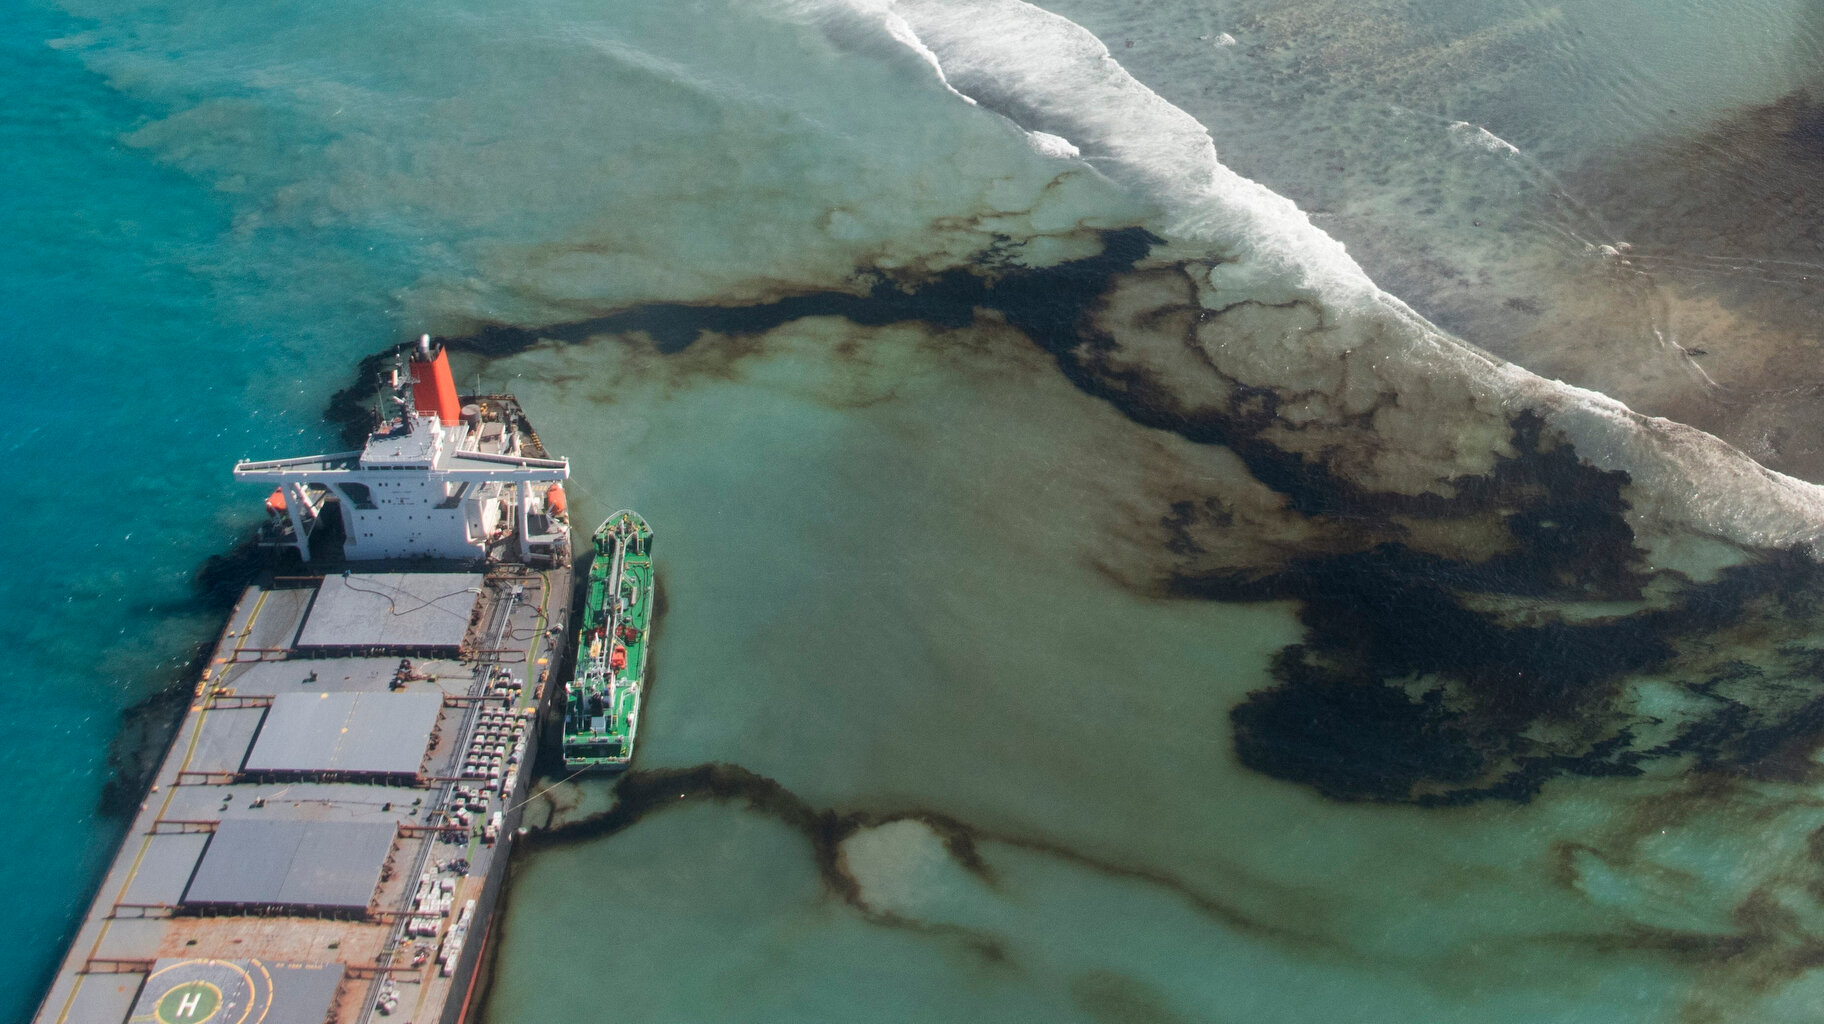  This Tuesday, Aug. 11, 2020 photo provided by the French Army shows oil leaking from the MV Wakashio, a bulk carrier ship that ran aground on a coral reef off the southeast coast of Mauritius. (Gwendoline Defente/EMAE via AP) 